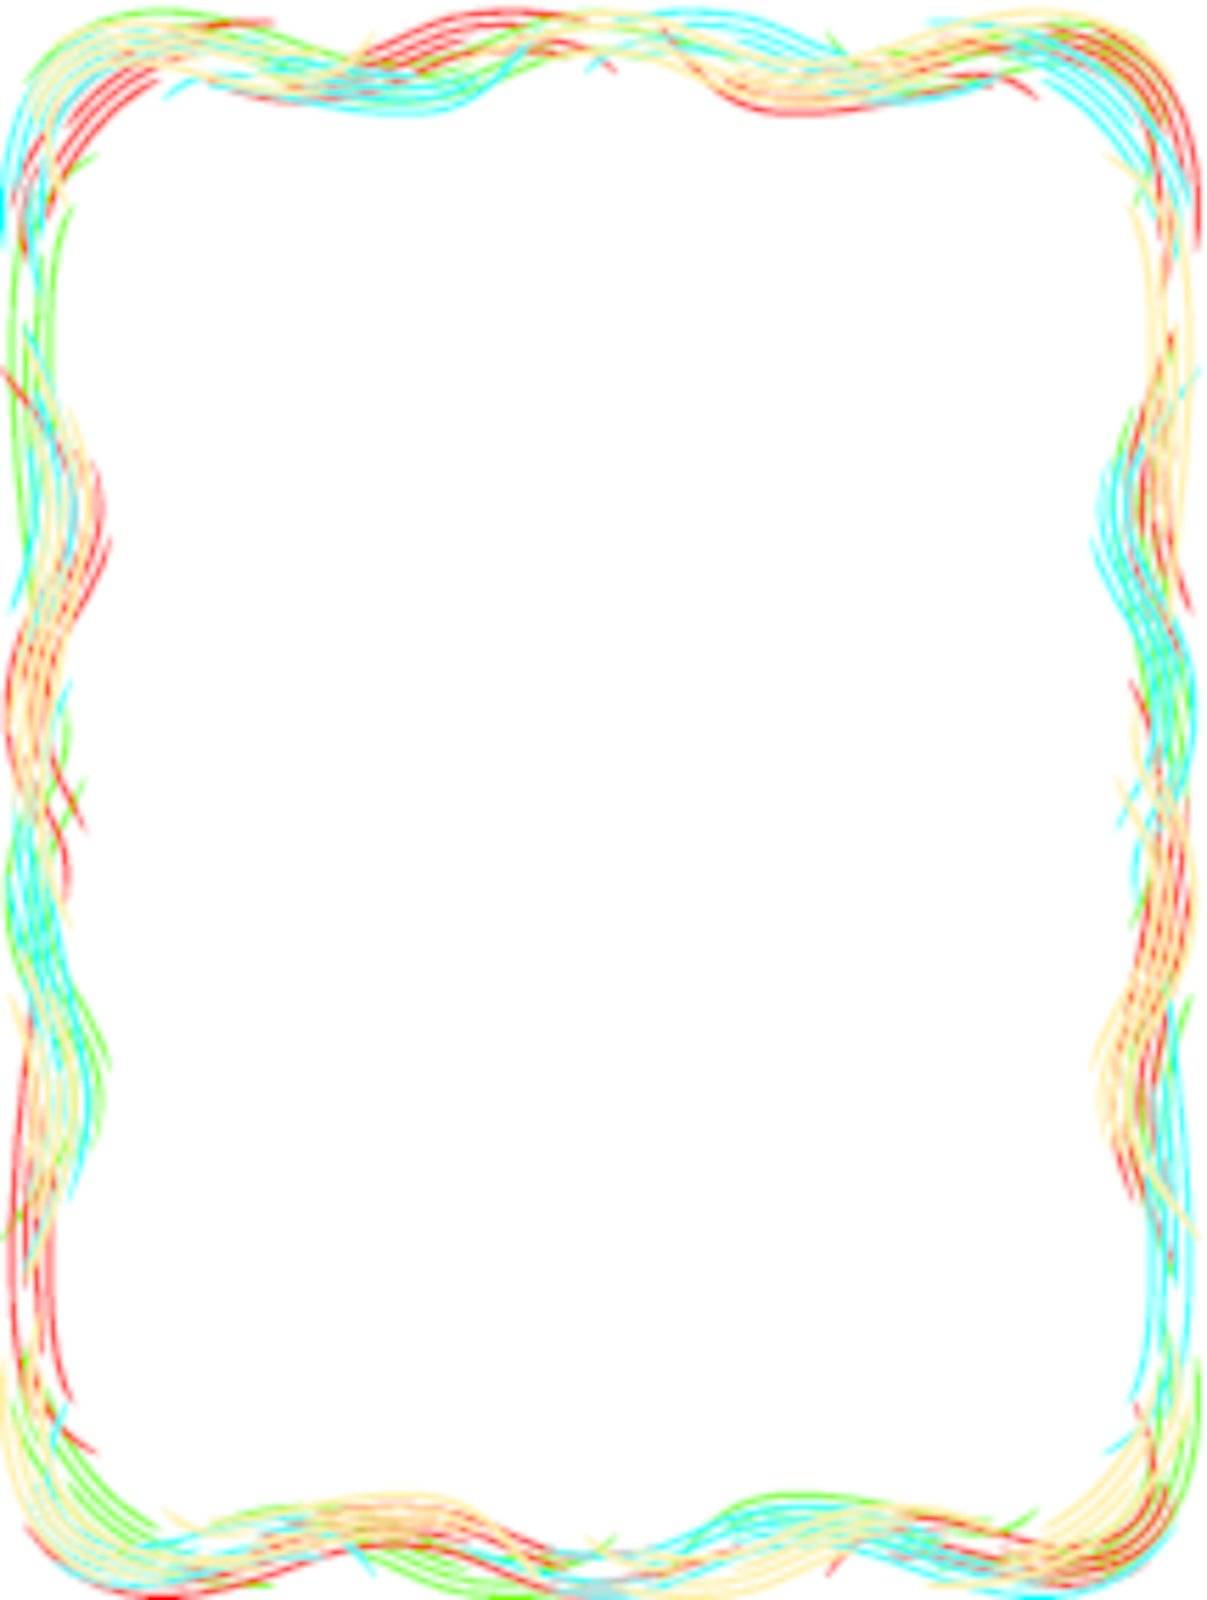 The drawn framework consisting of lines of different colours